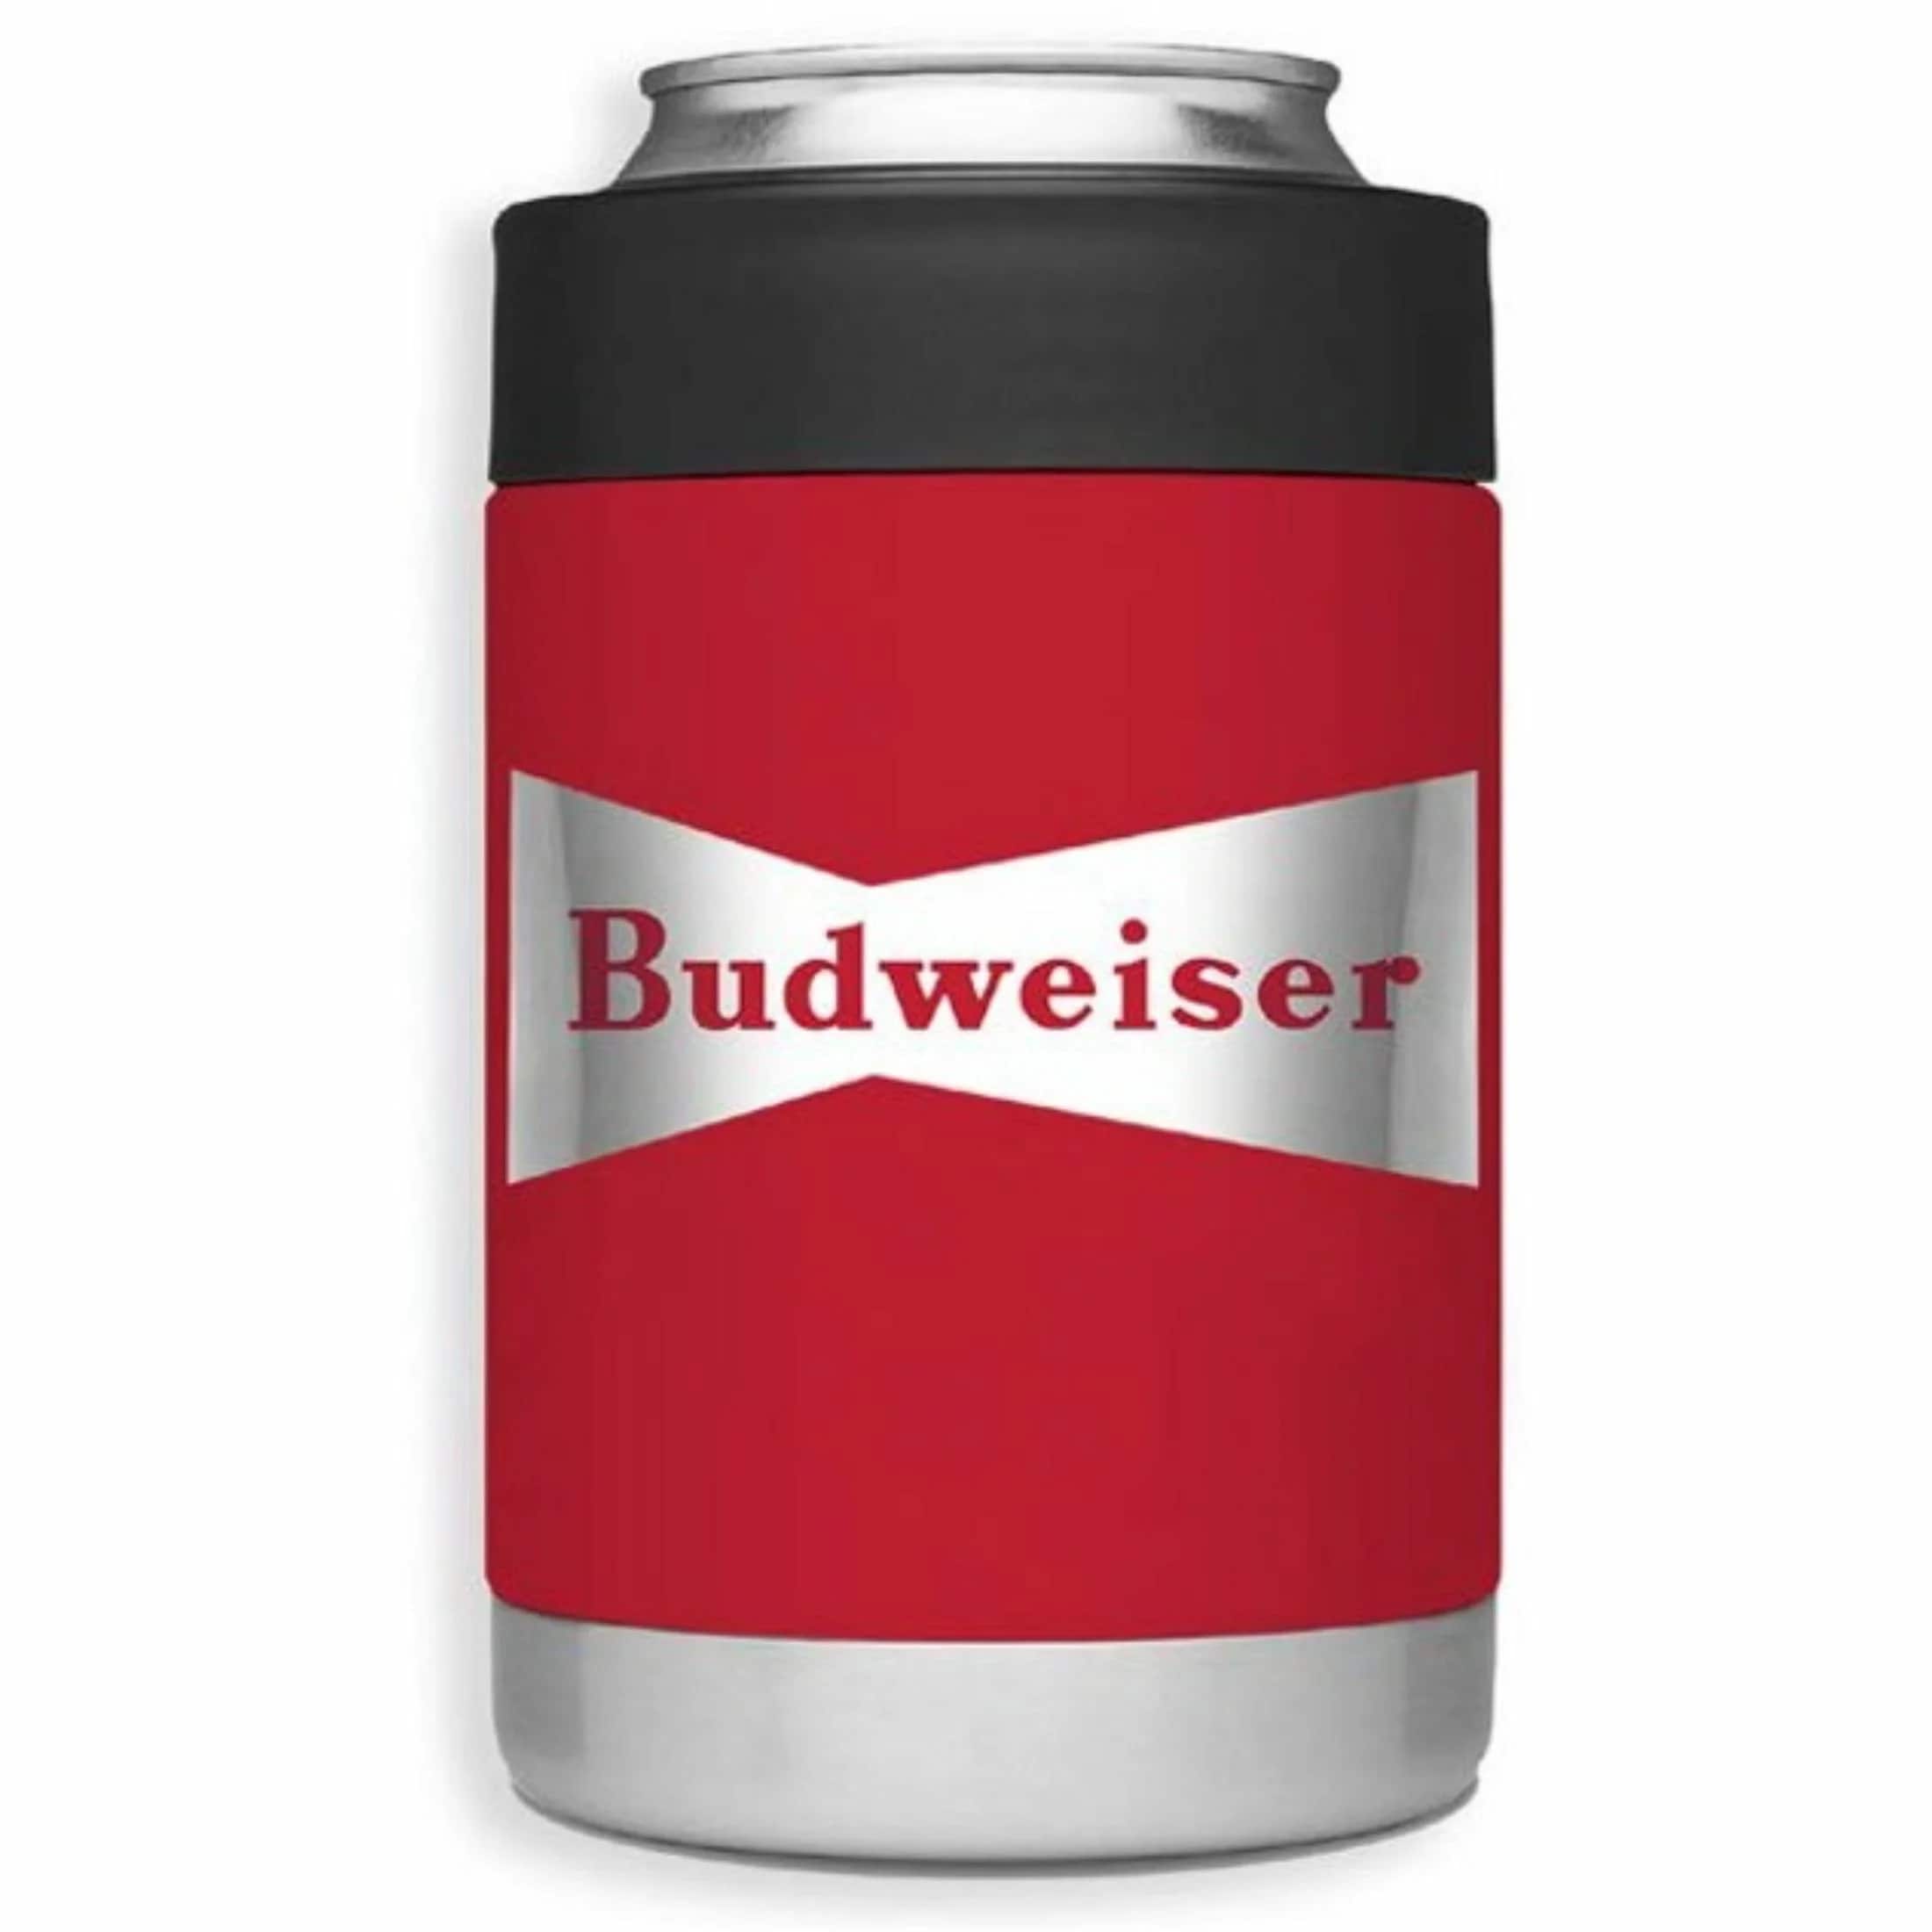 https://ak1.ostkcdn.com/images/products/is/images/direct/8209a14dd171431876d44ff0da586897dd5dd429/Budweiser-Stainless-Steel-Insulated-Beverage-holder---Red.jpg